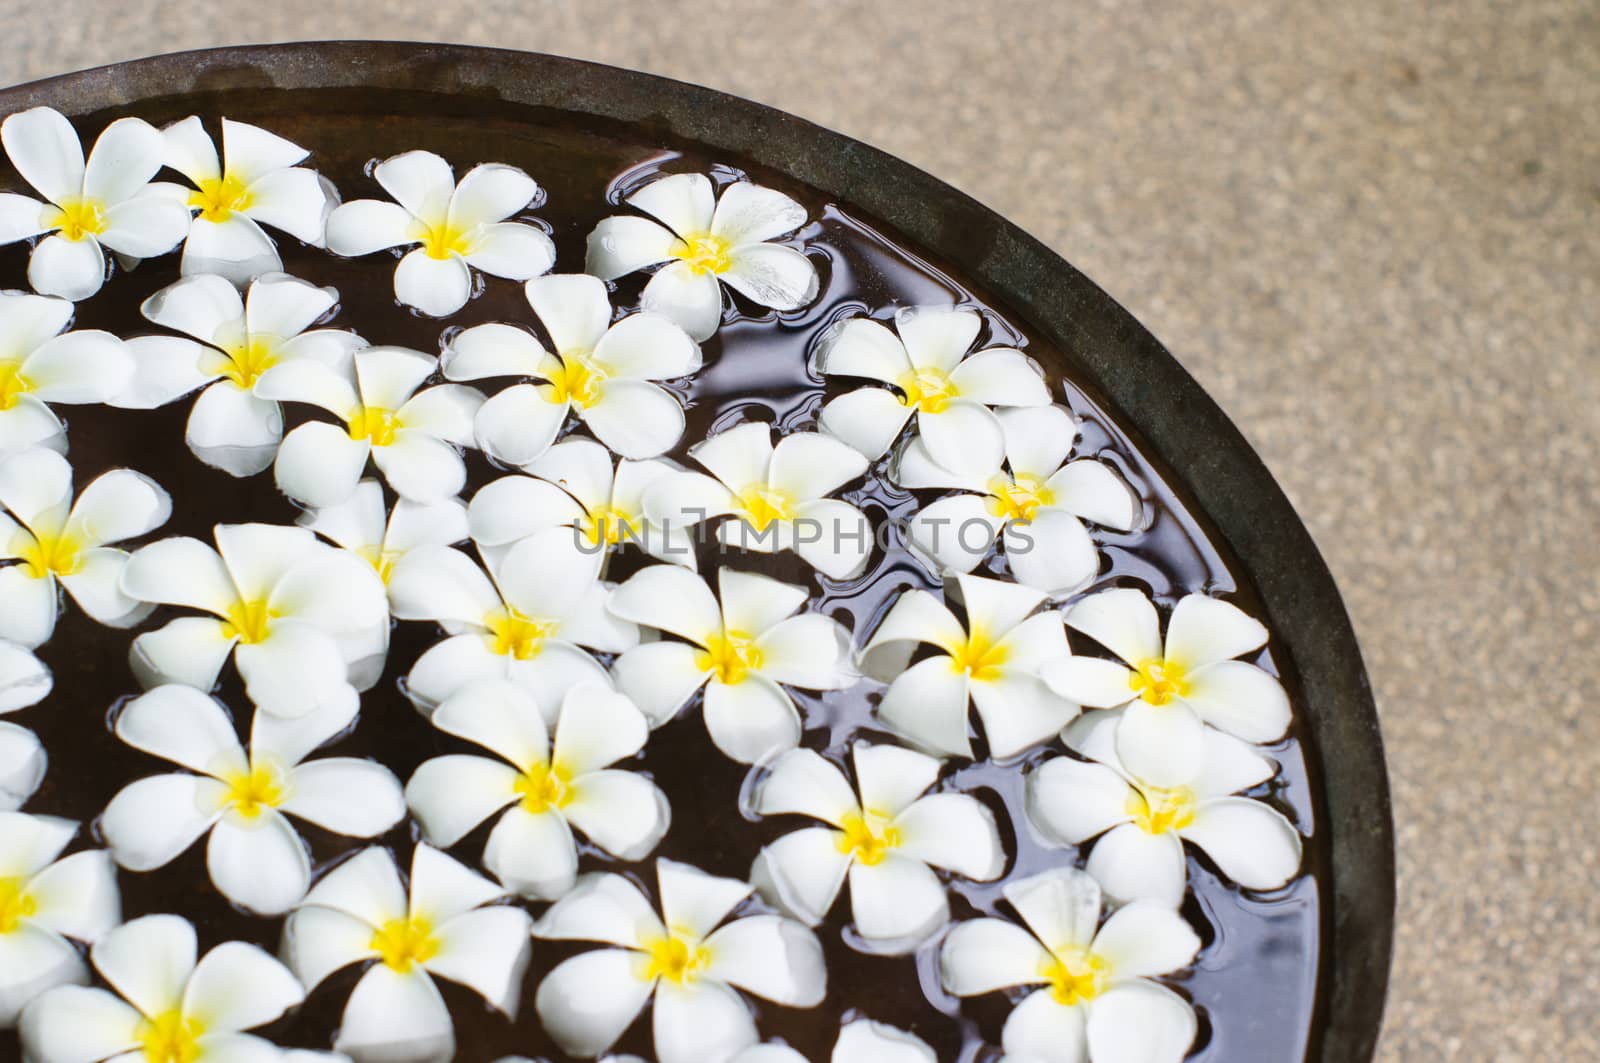 A close up shot of decorative flowers floating on water surface.